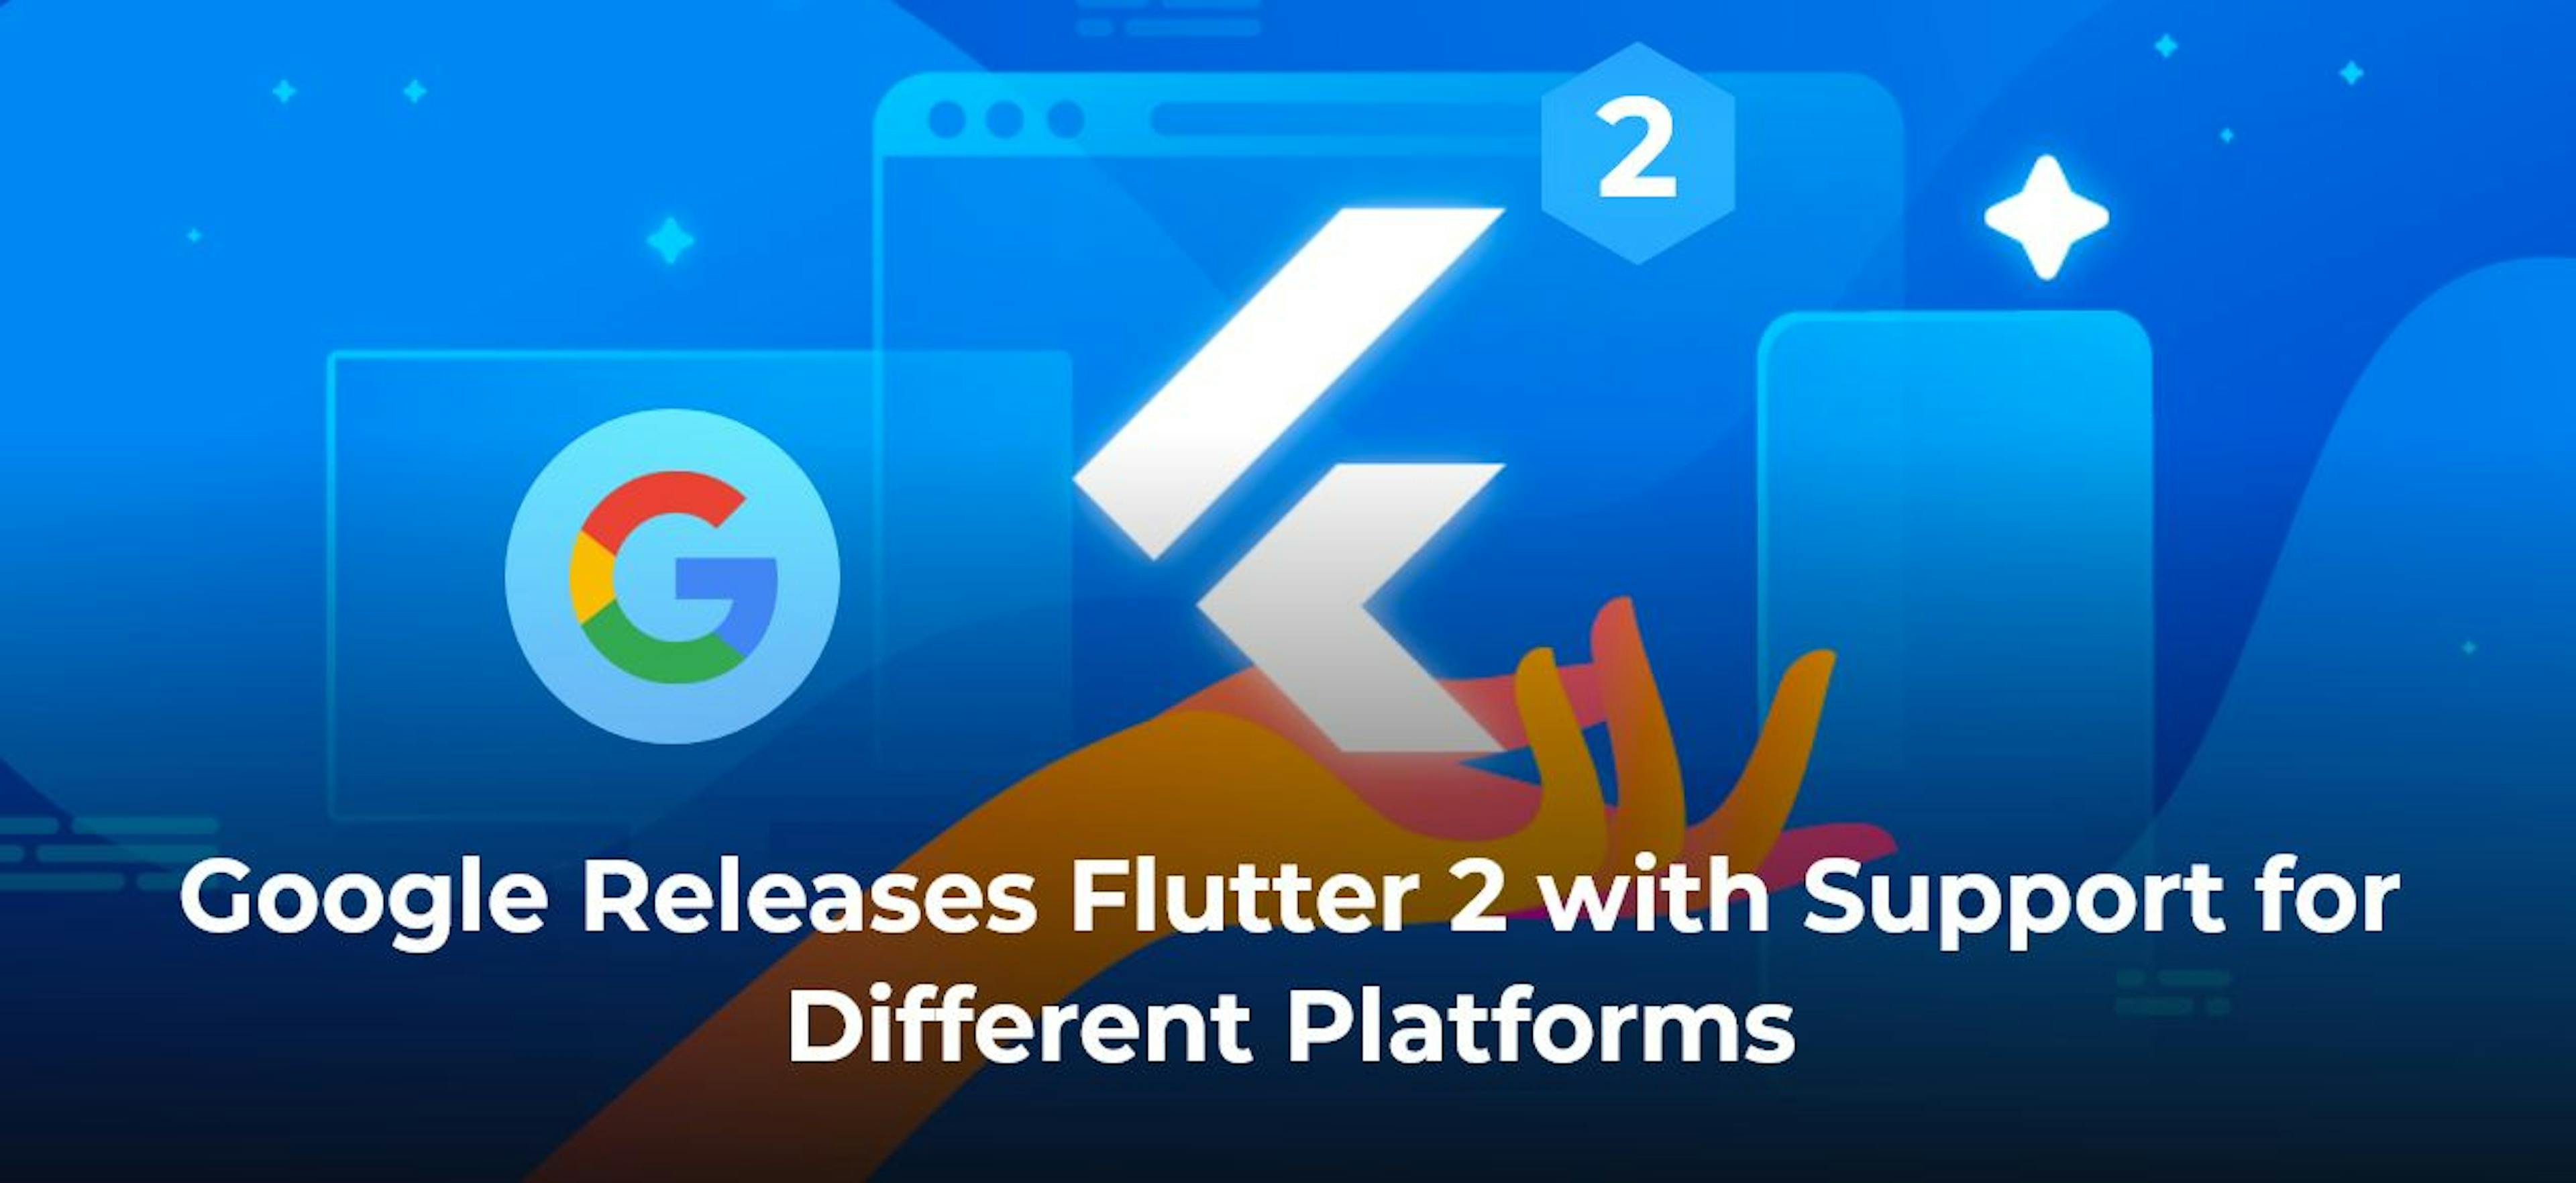 /google-releases-flutter-2-with-support-for-different-platforms-d31k35wv feature image